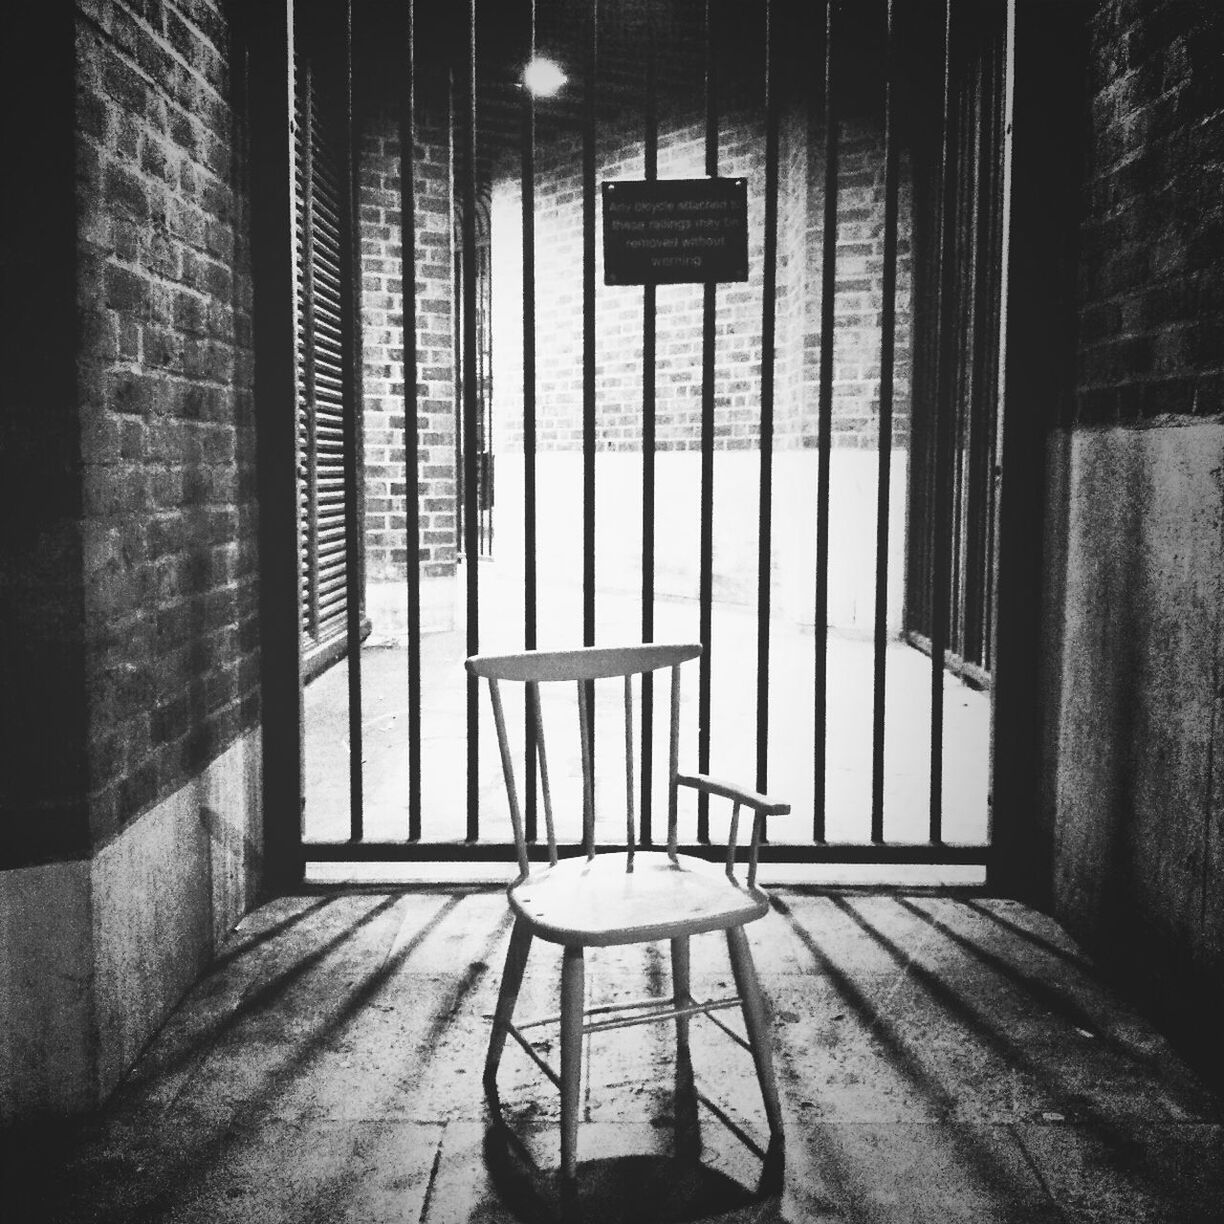 Empty chair against bars